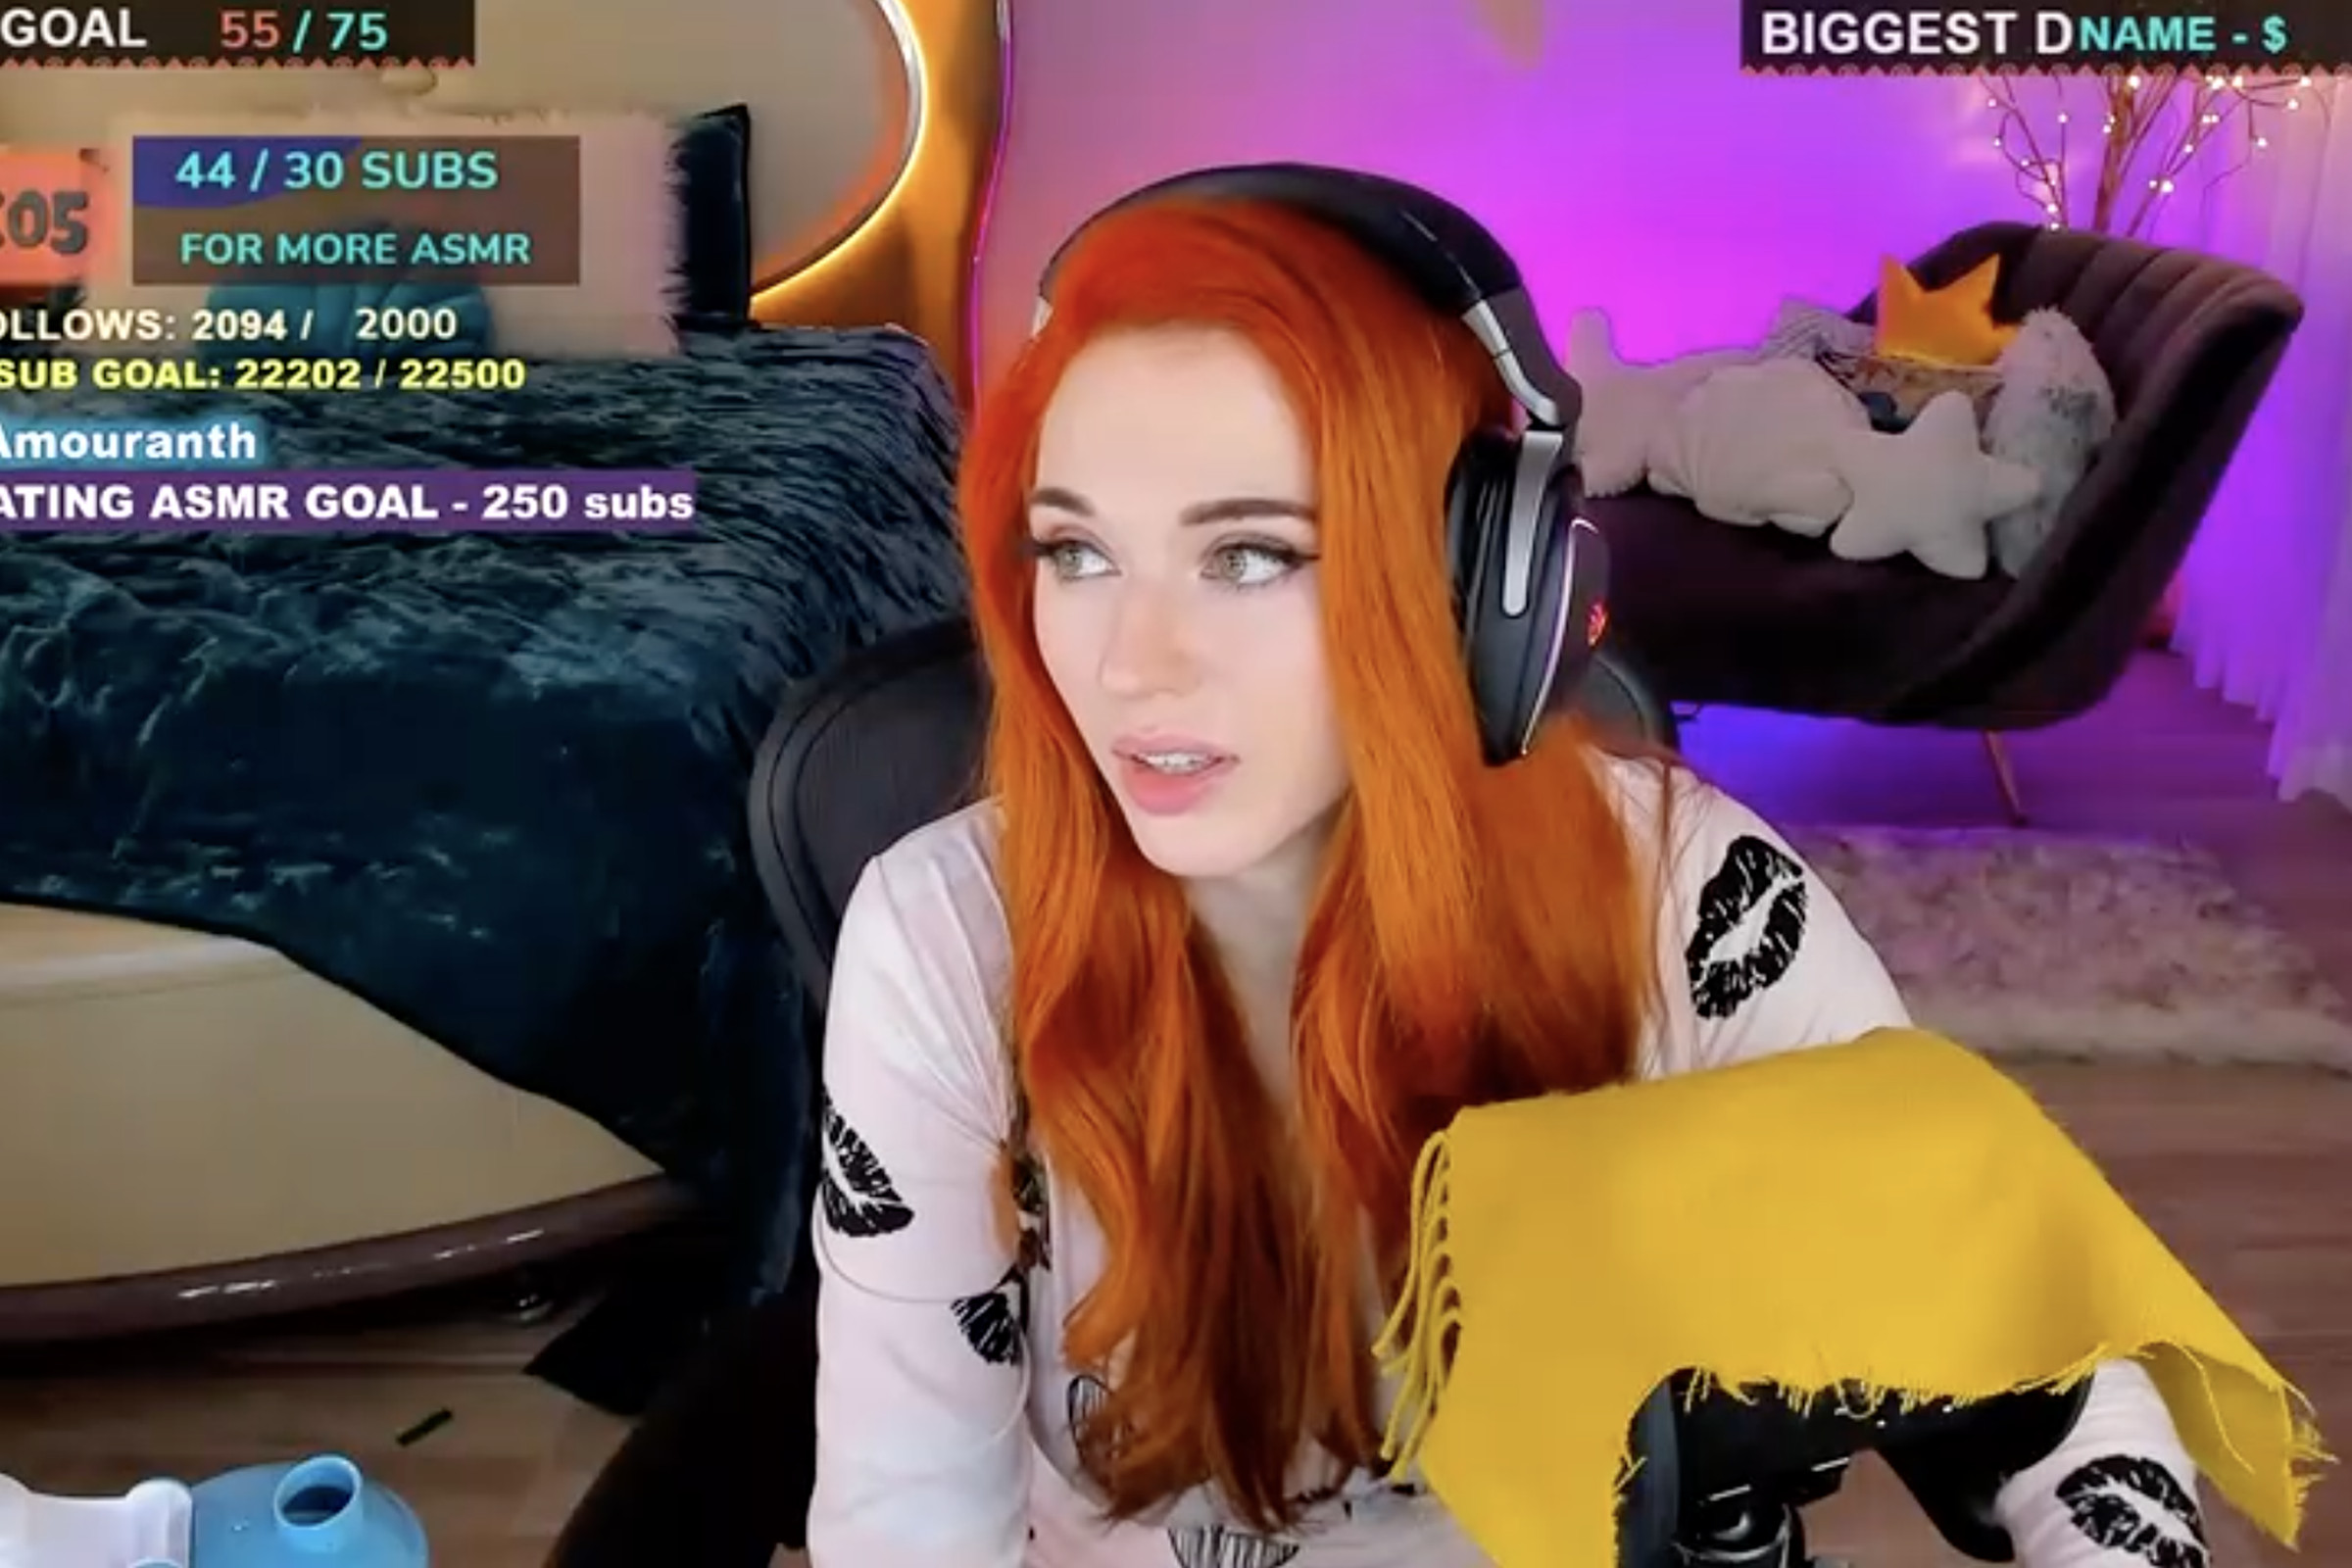 Amouranth during an ASMR stream.